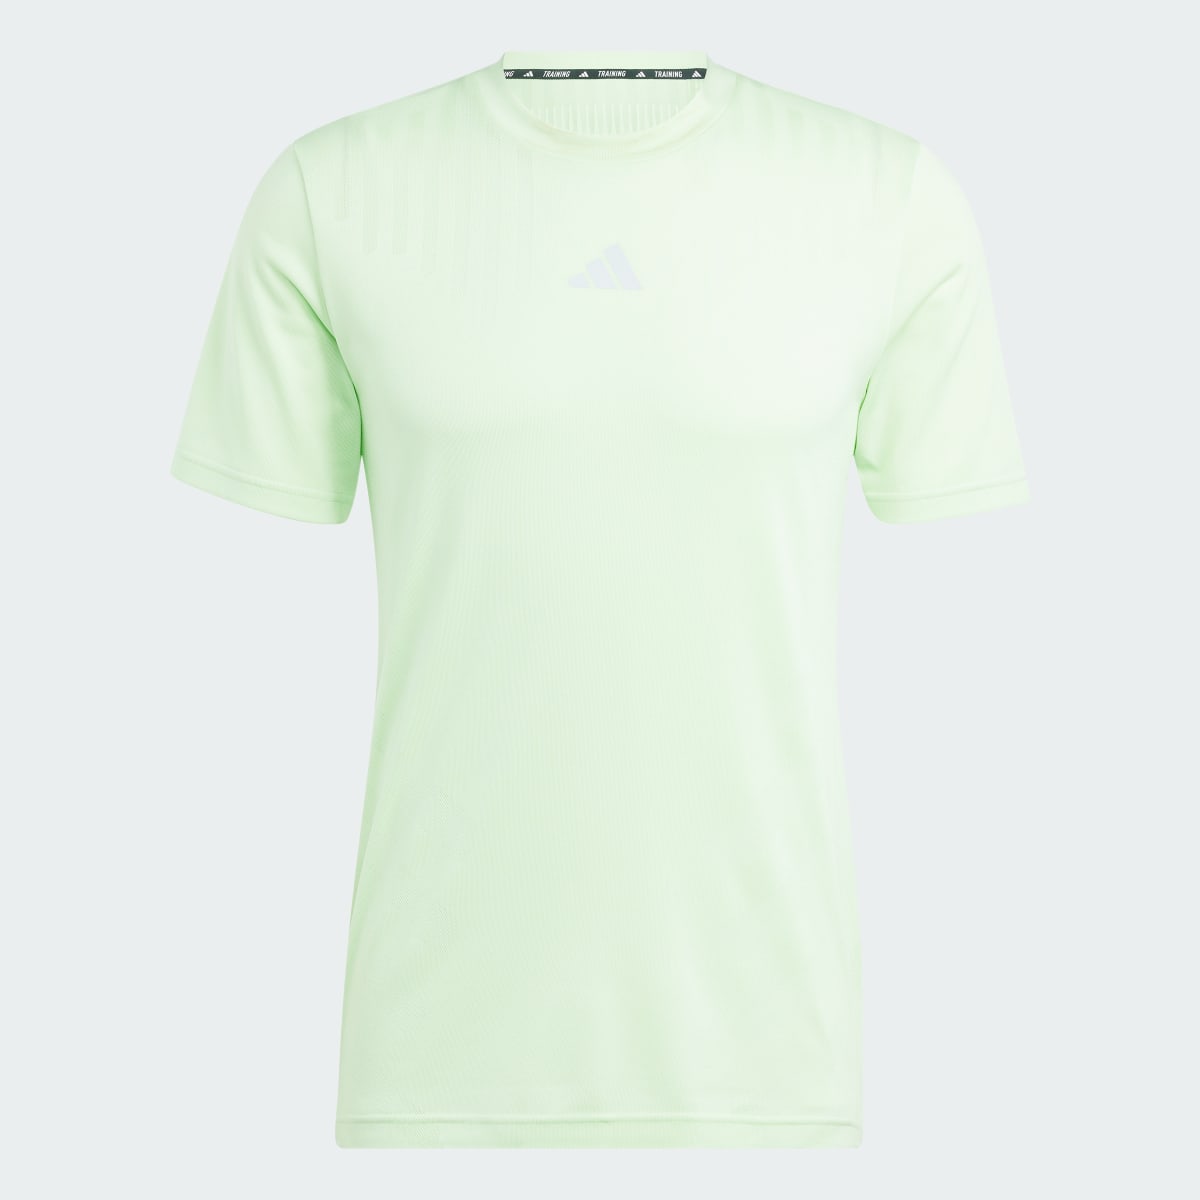 Adidas HIIT Airchill Workout Tee. 5